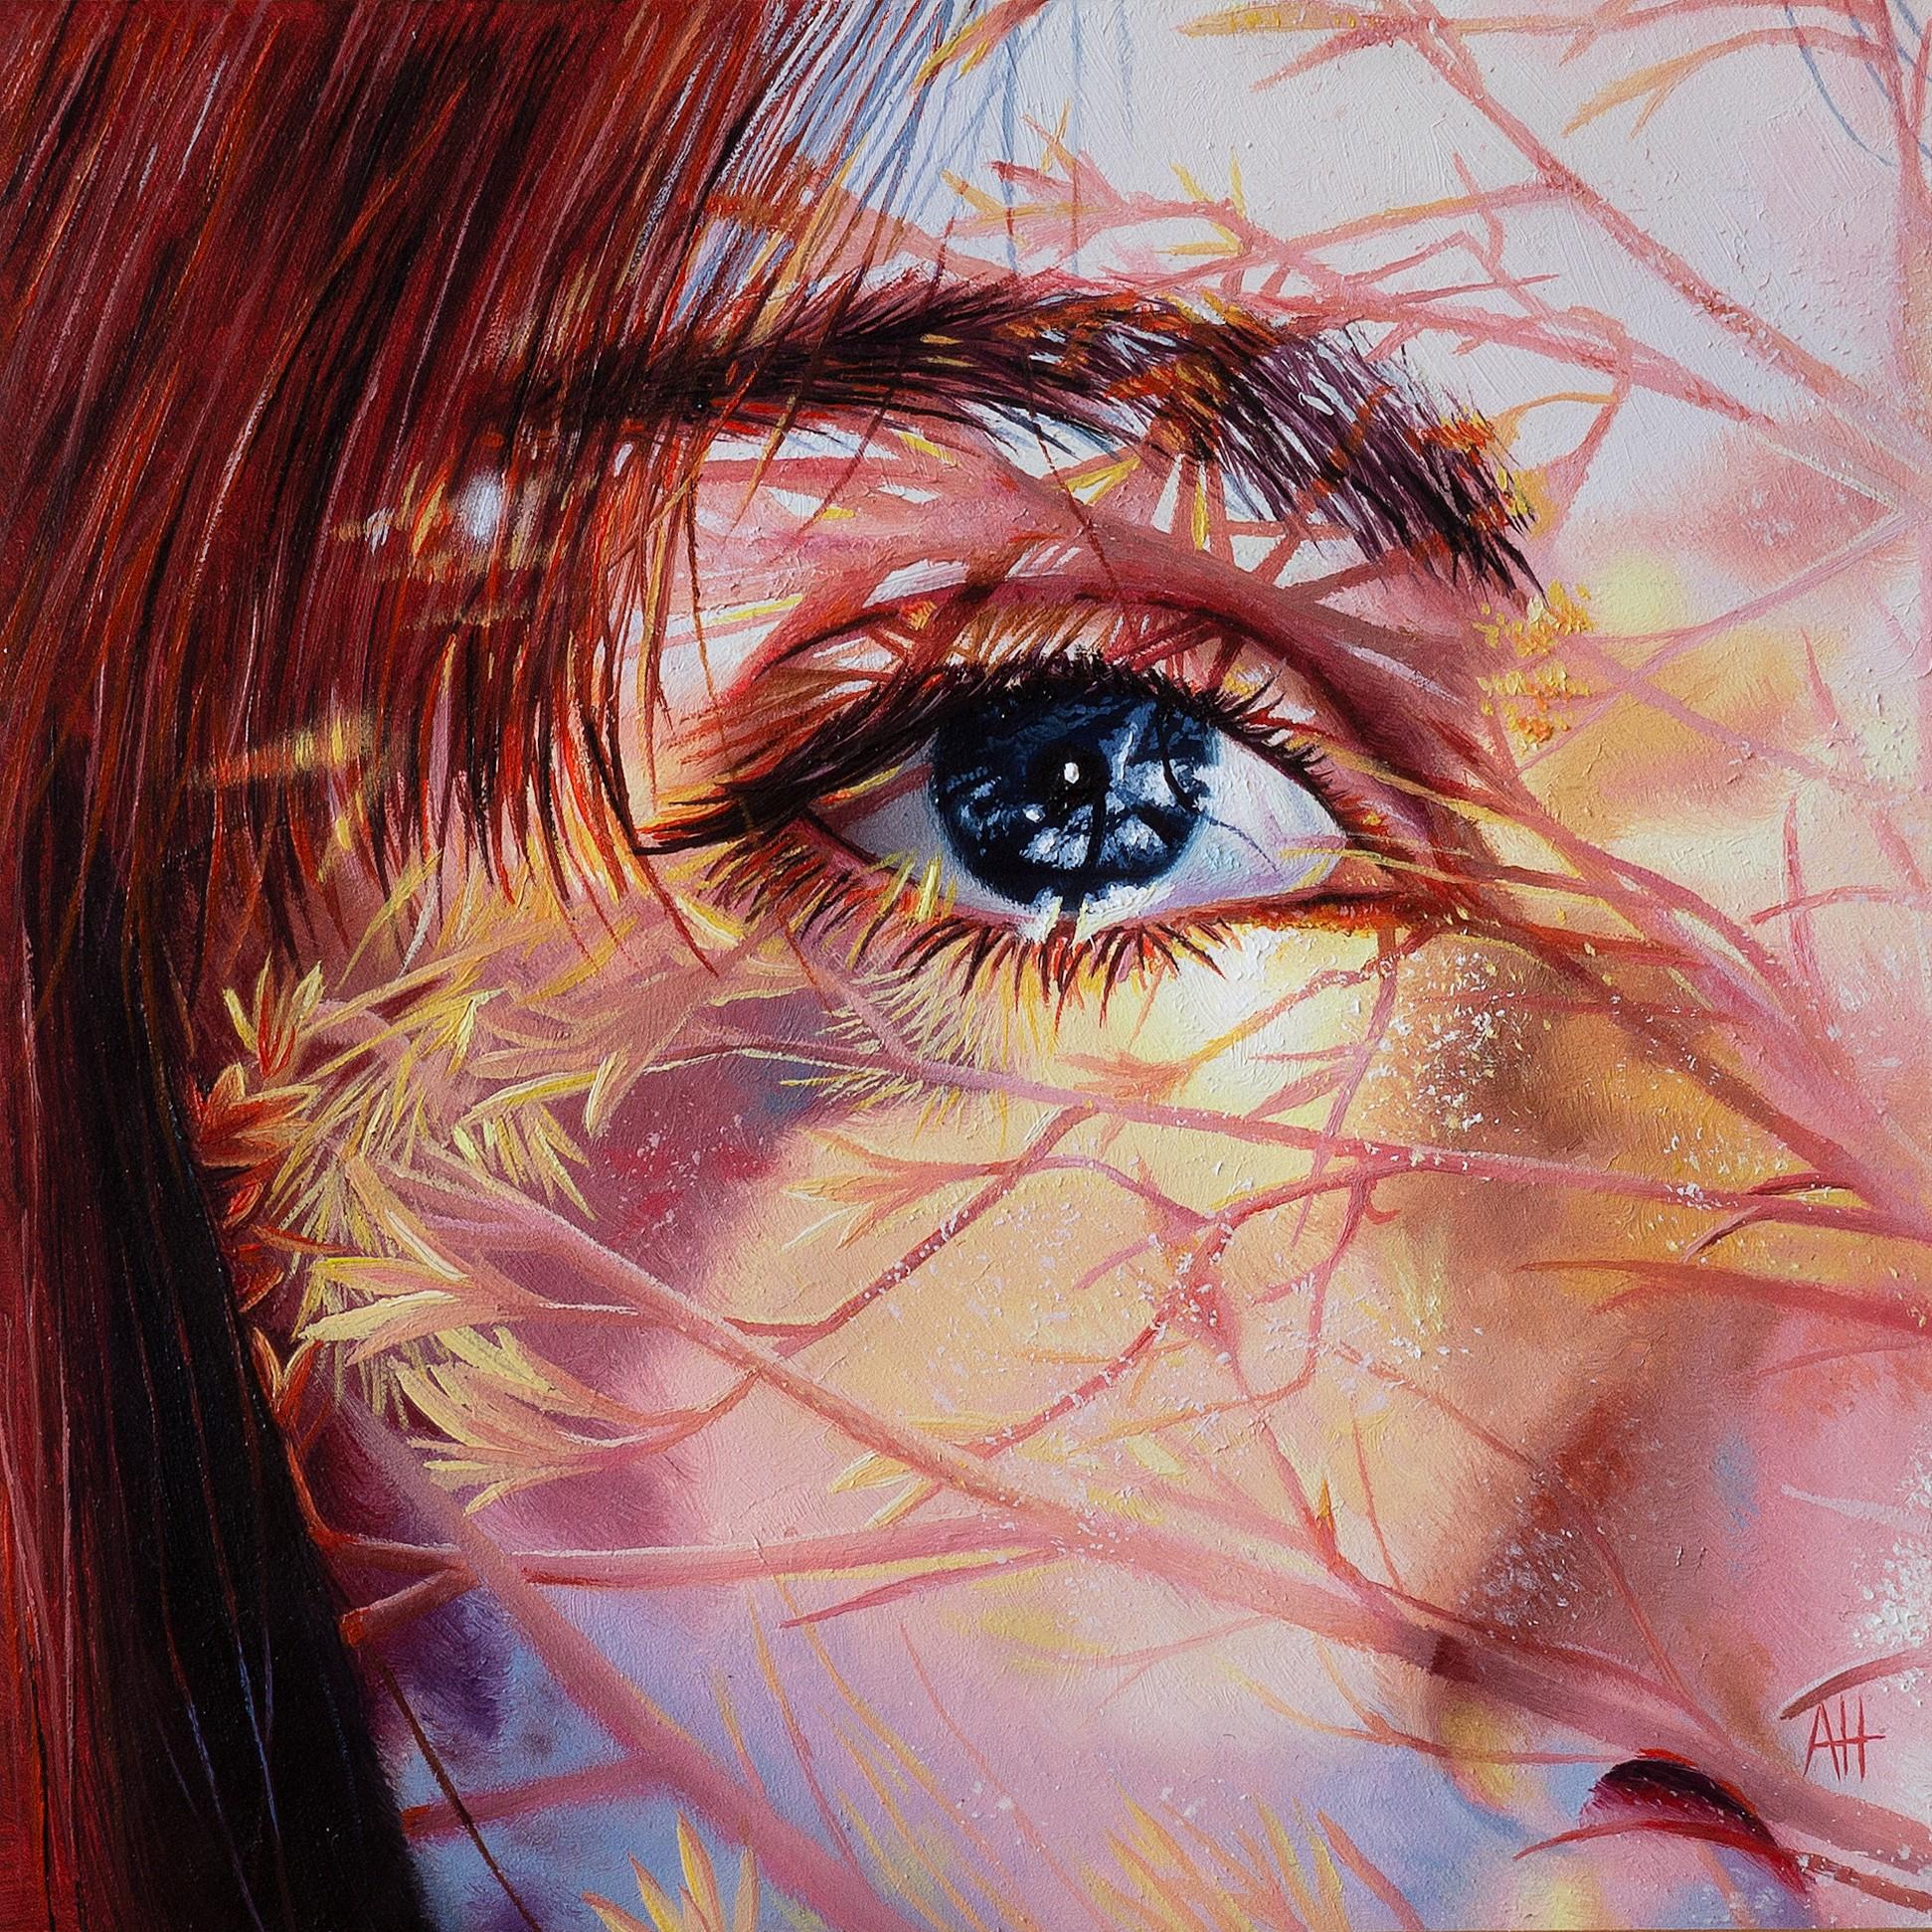 Austin Howlett Portrait Painting - "Behind Our Eyes" Oil Painting